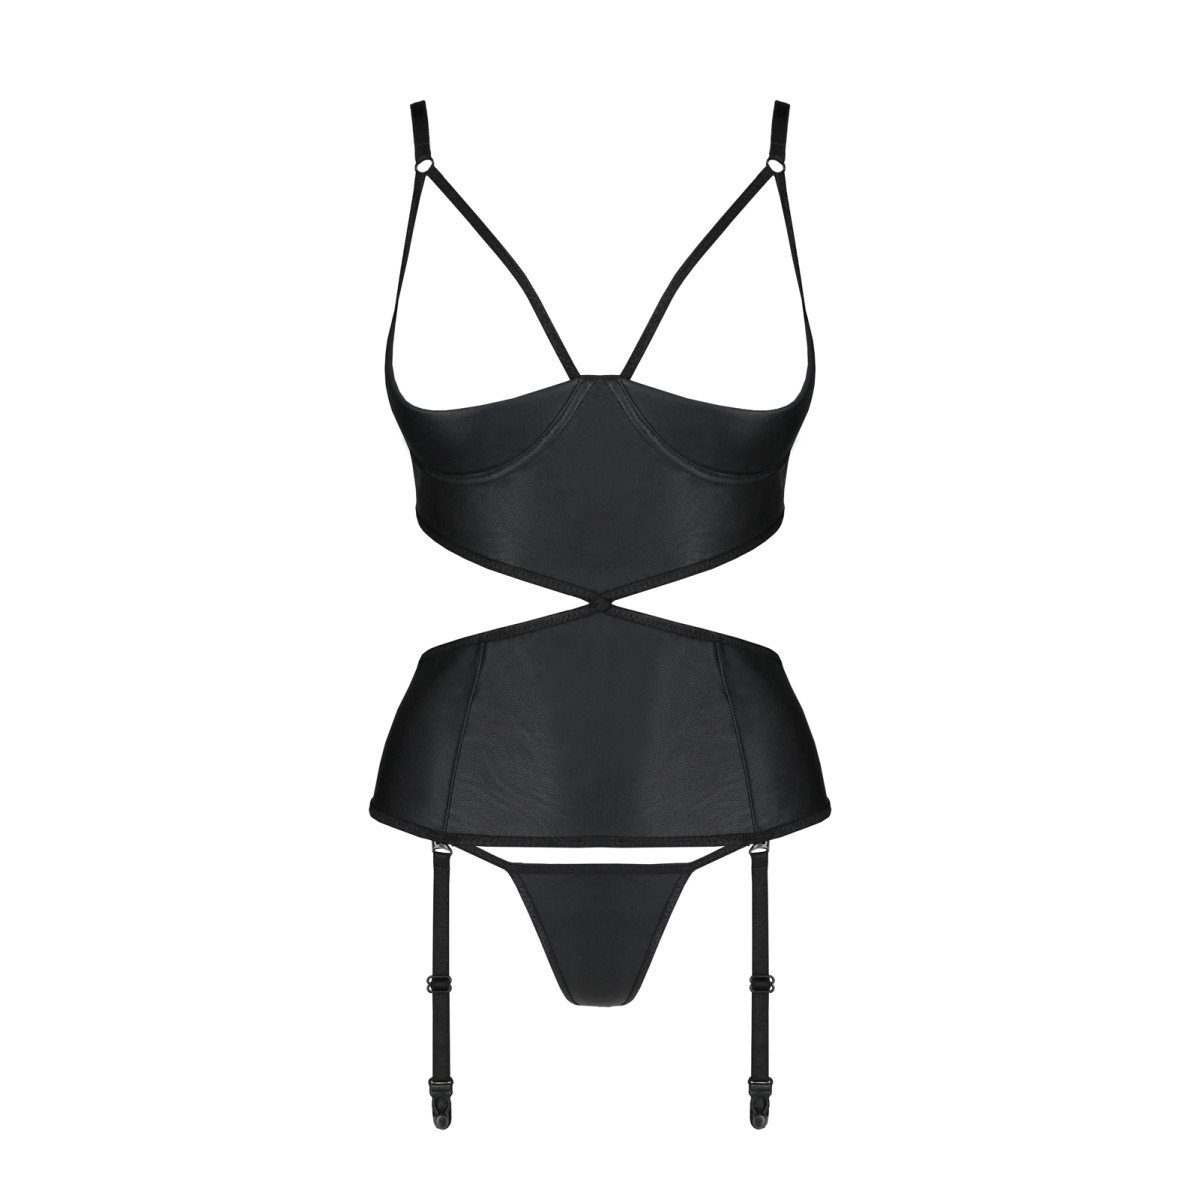 thong - open Passion-Exklusiv corset (L/XL,S/M,XXL) PE with & cups black Jannies Corsage